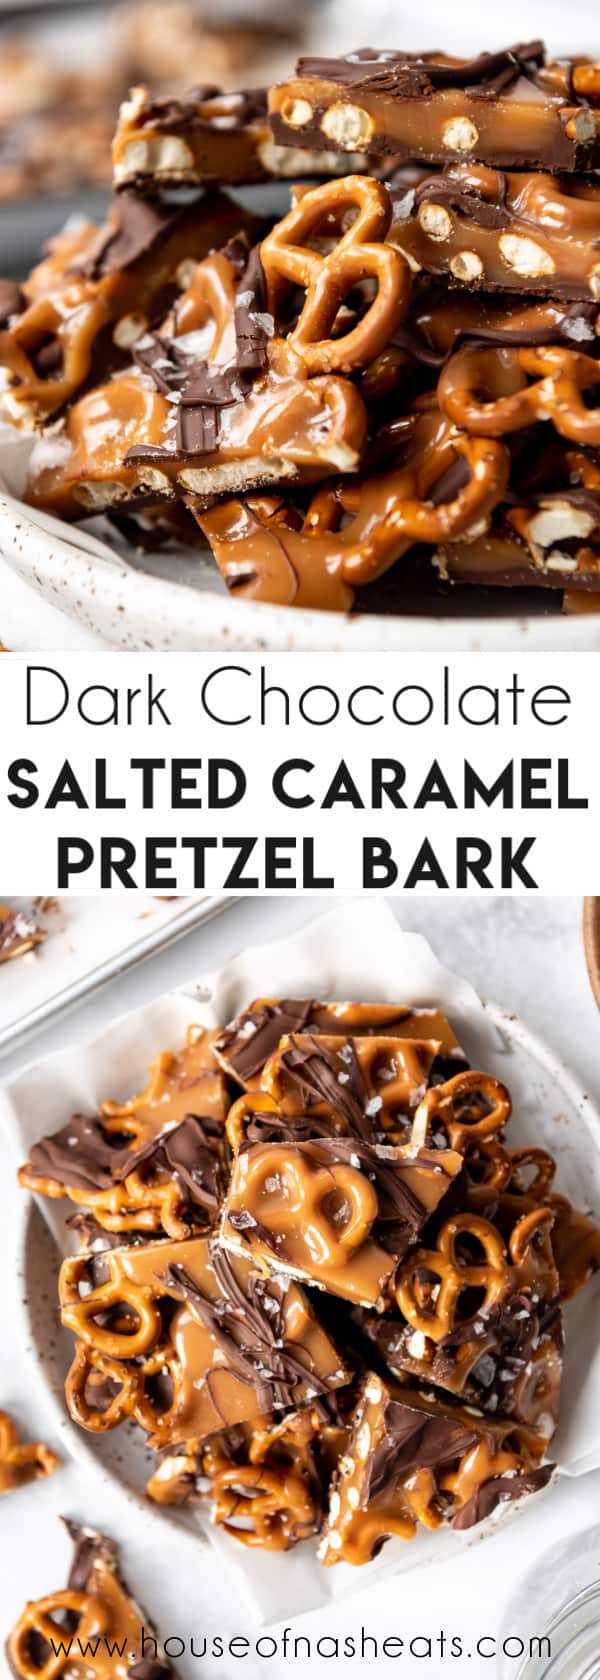 A collage of images of dark chocolate salted caramel pretzel bark candy with text overlay.